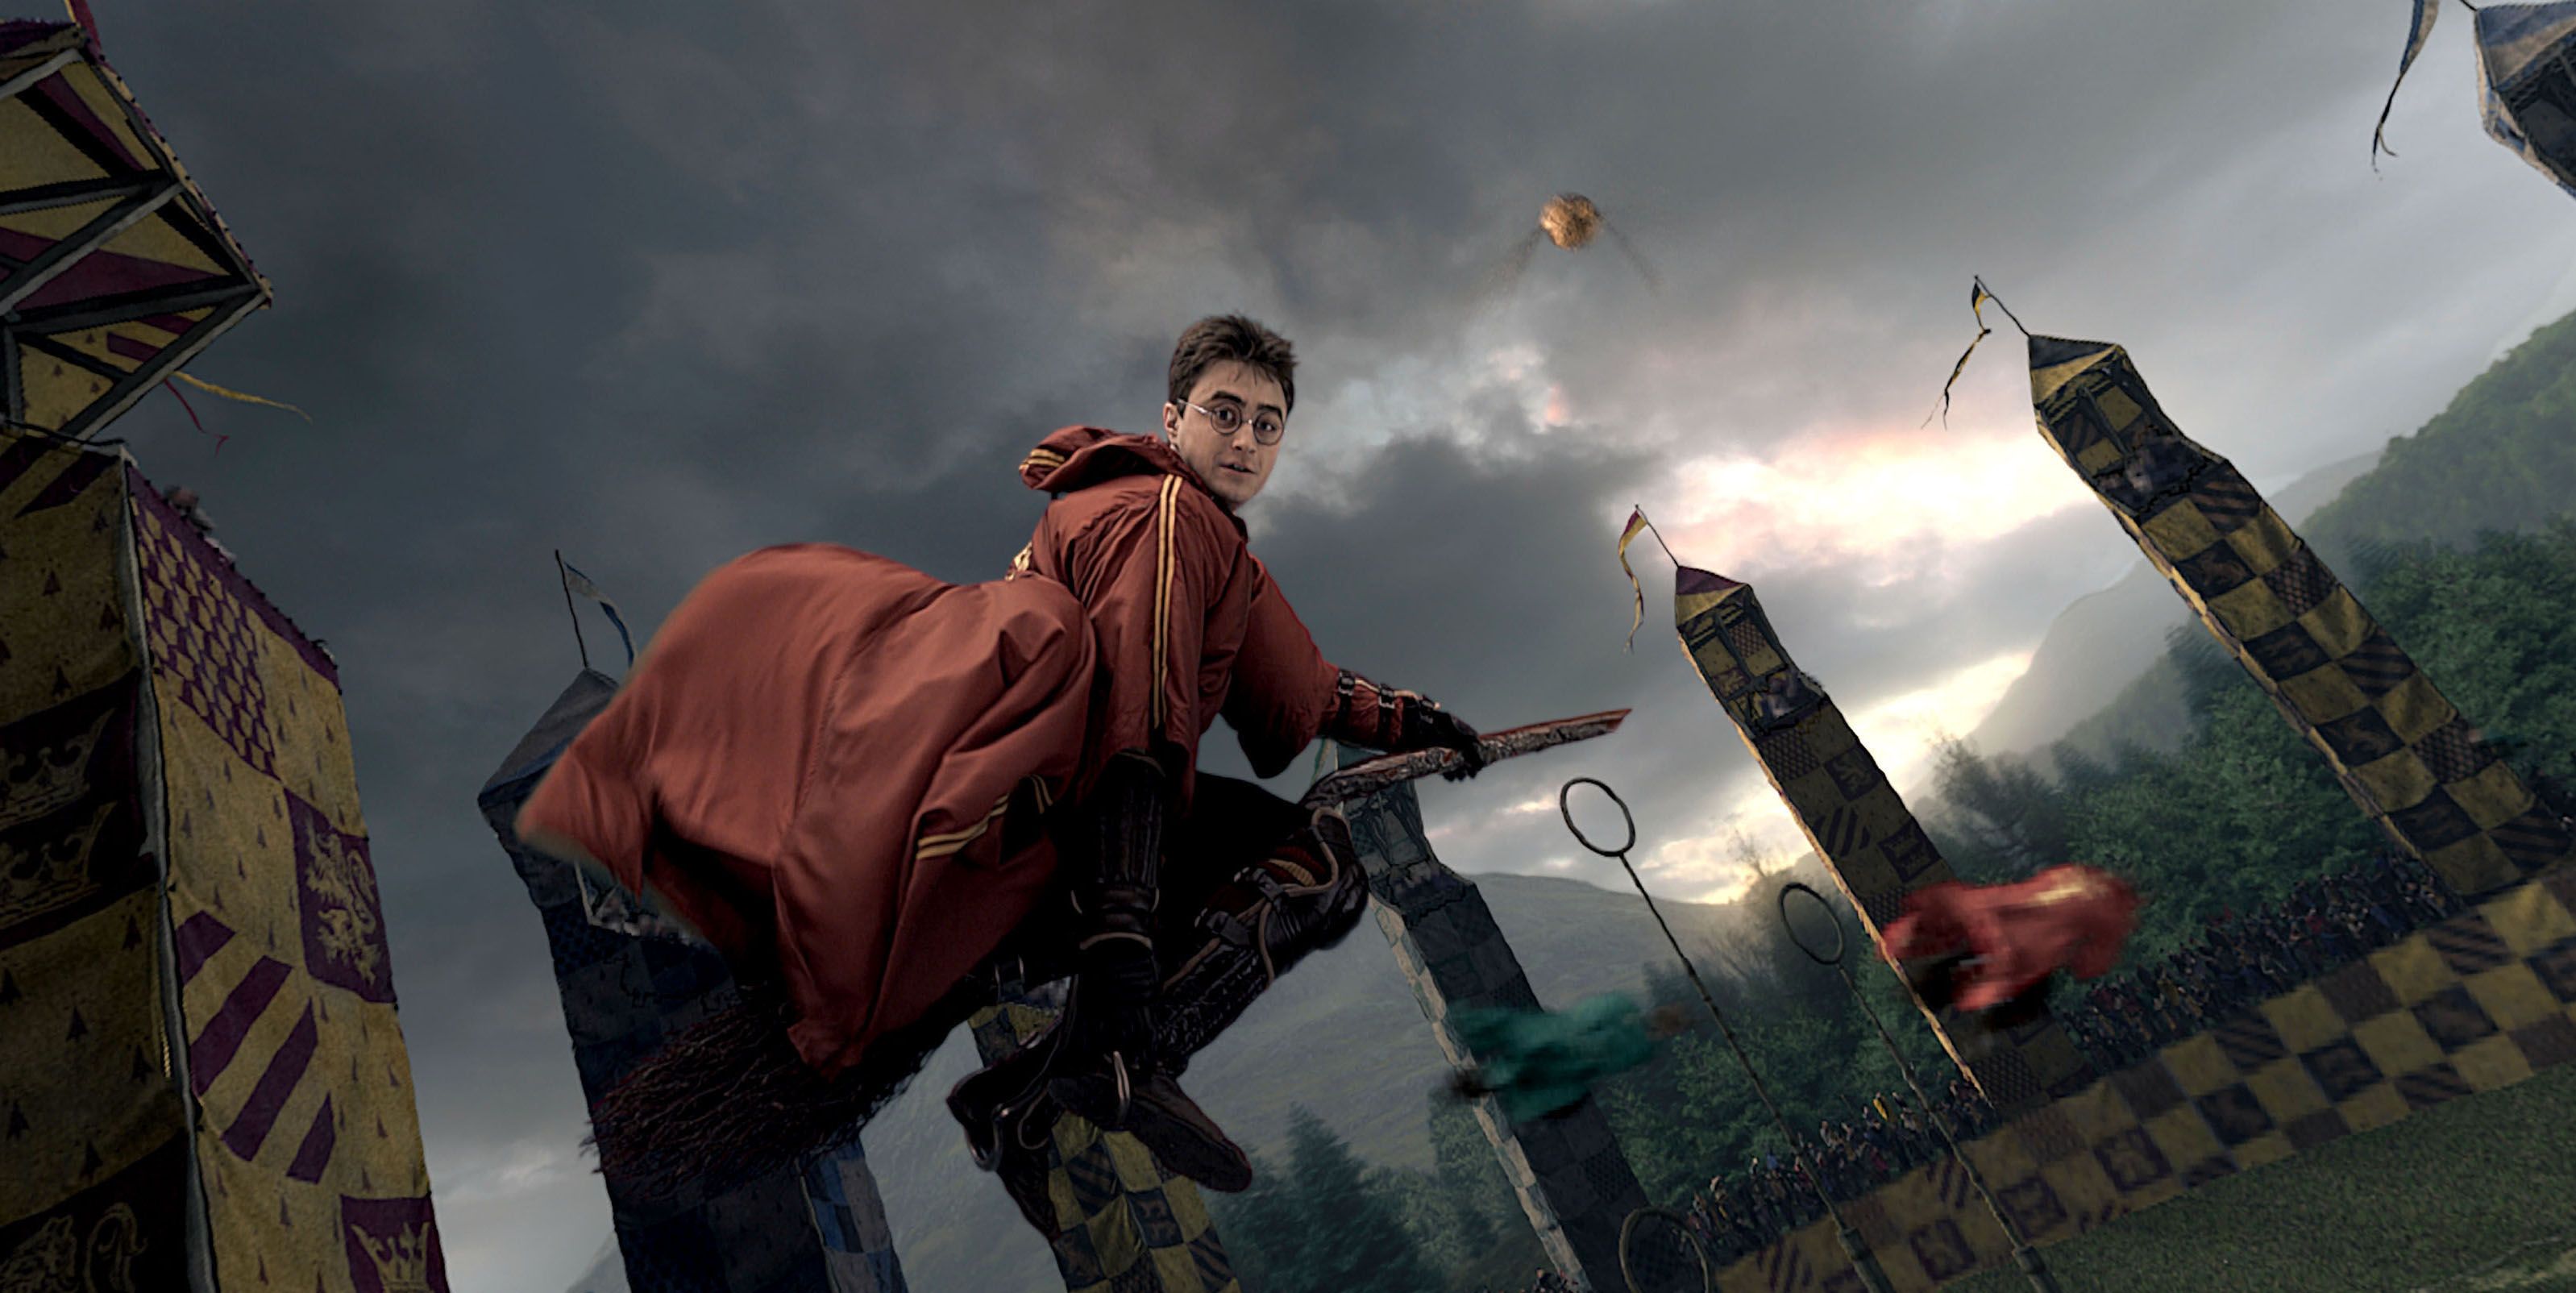 Ranked: All The Broomsticks In Harry Potter By Speed